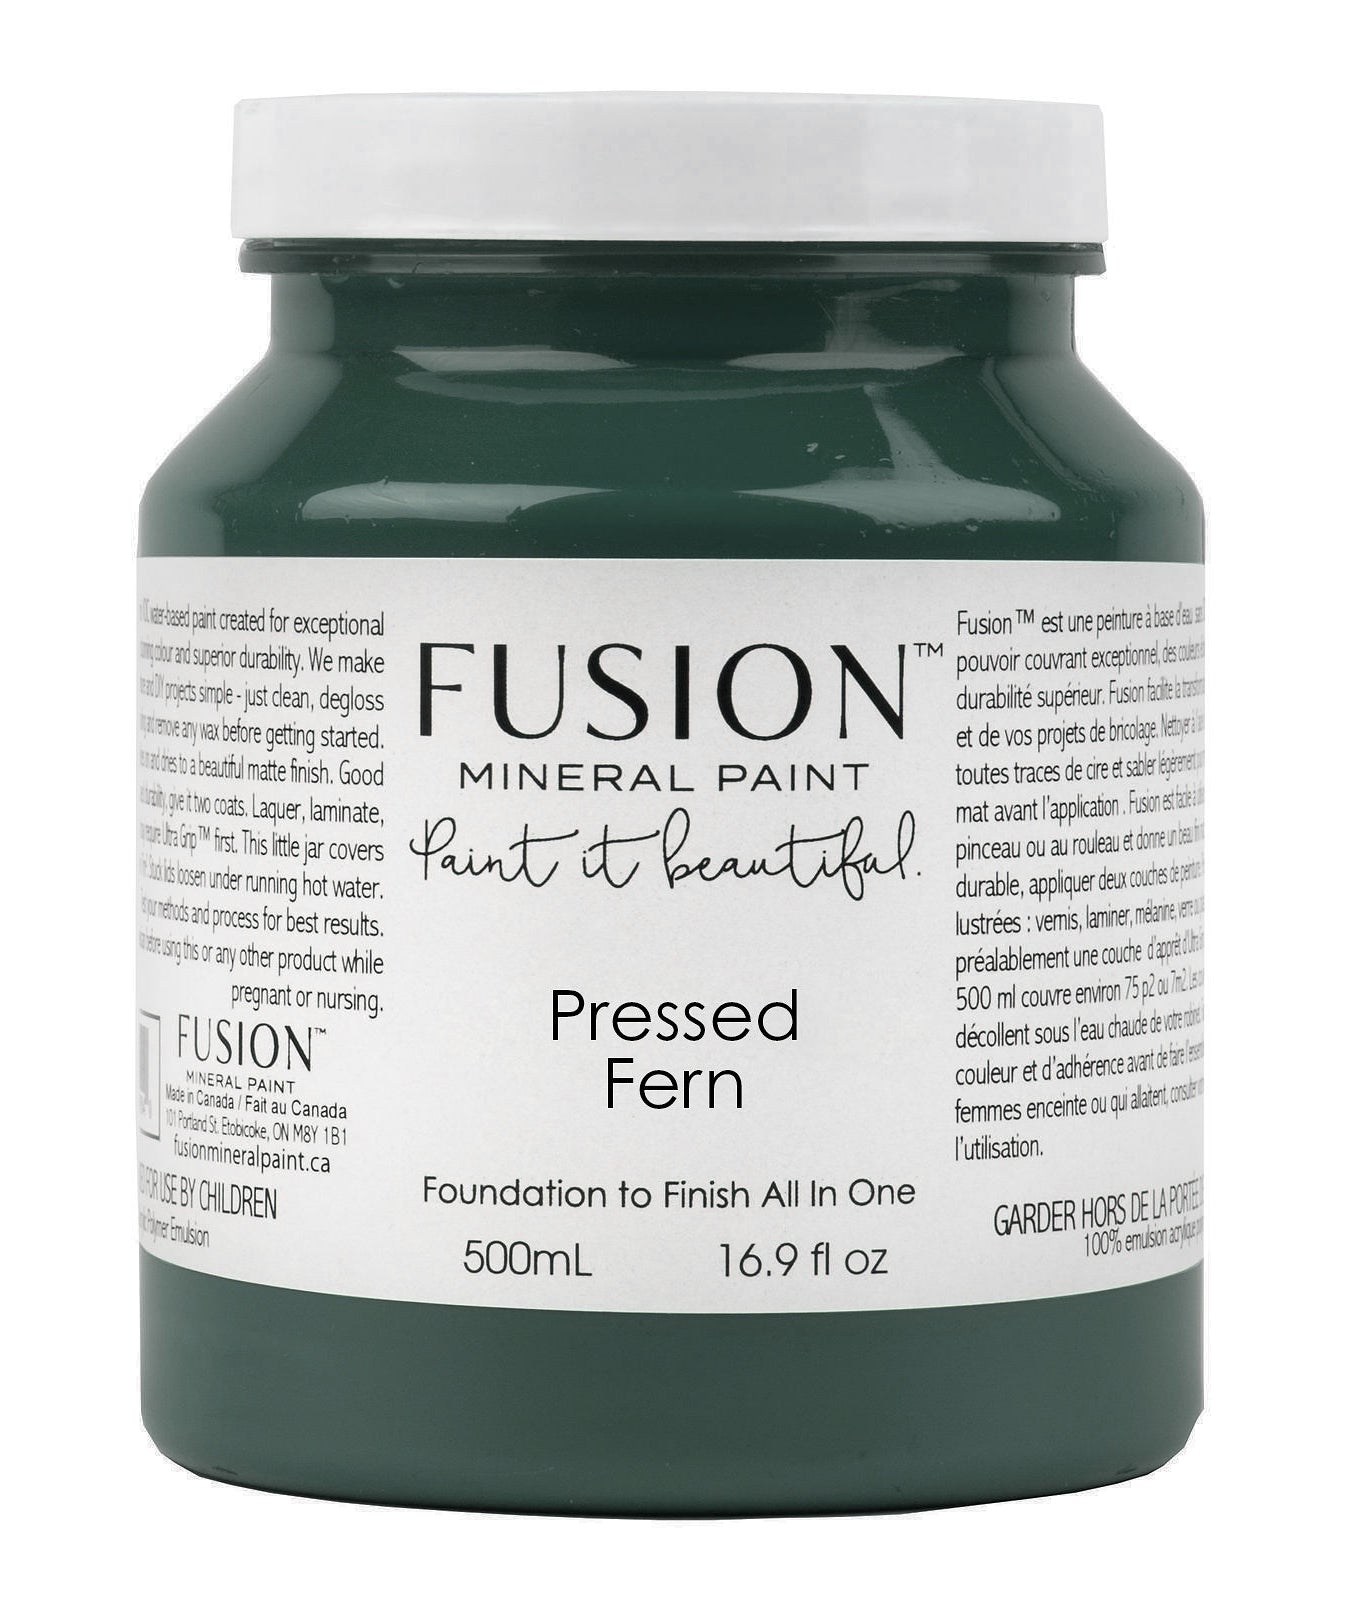 PRESSED FERN Fusion Mineral Paint